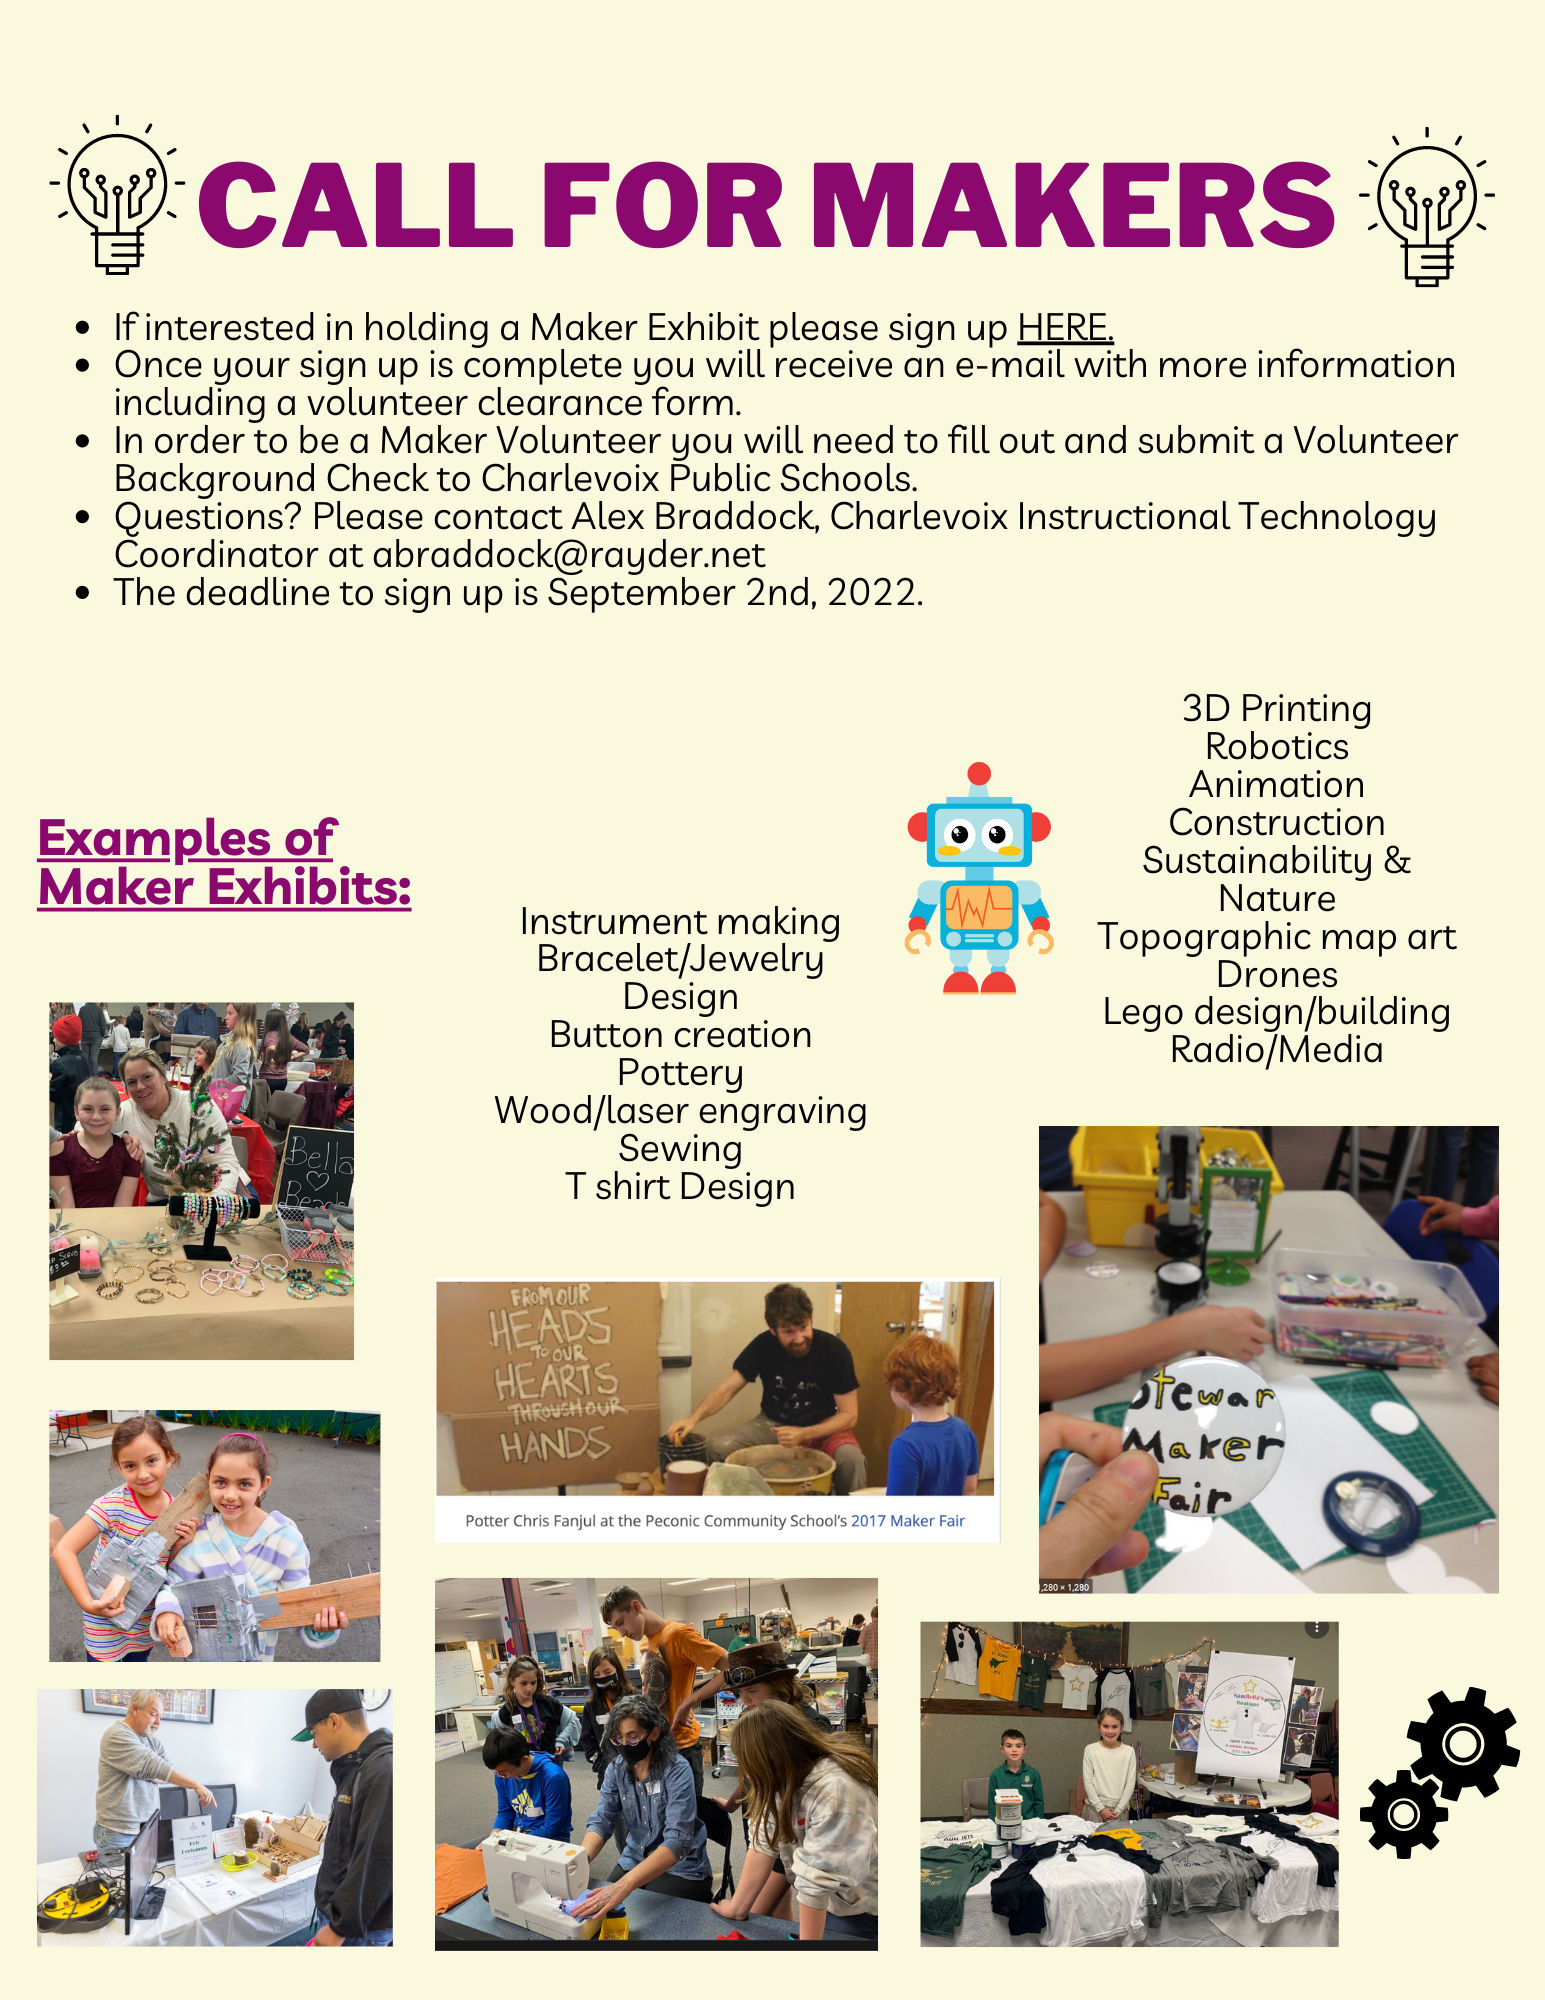 Example of Maker Exhibits for Maker Fair